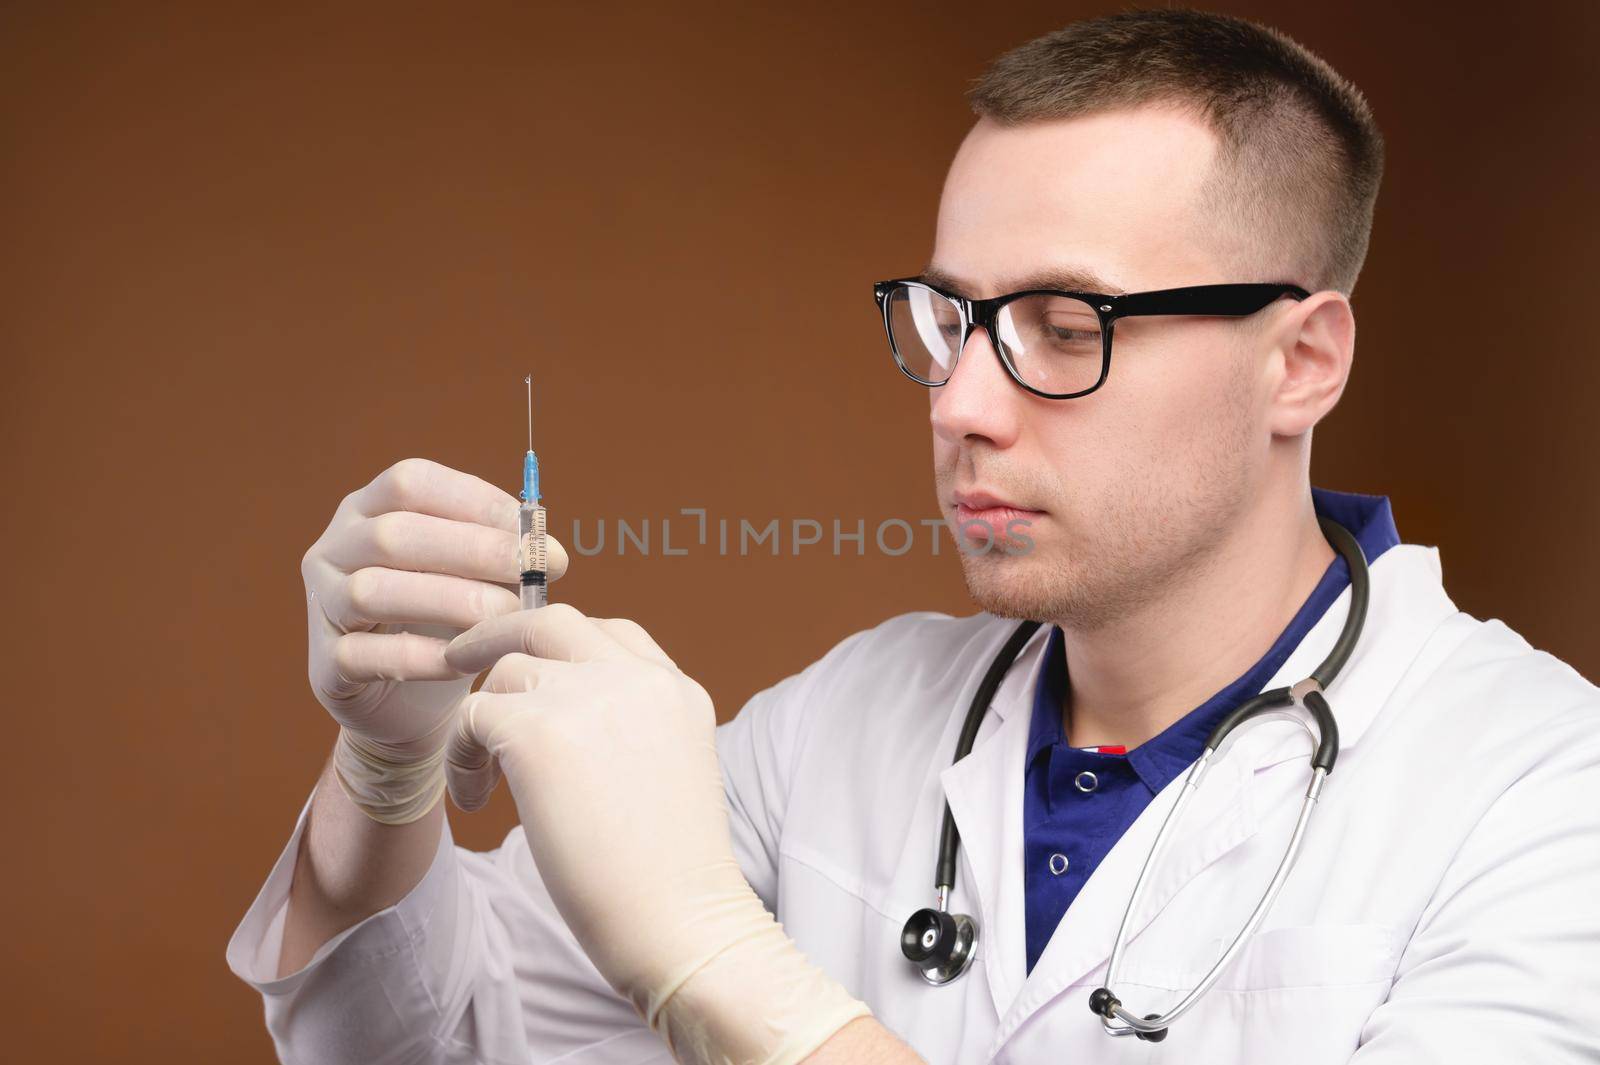 Young caucasian doctor man preparing to do a vaccination with a syringe. Studio shot on a brown background. Release air from the syringe before the injection by yanik88